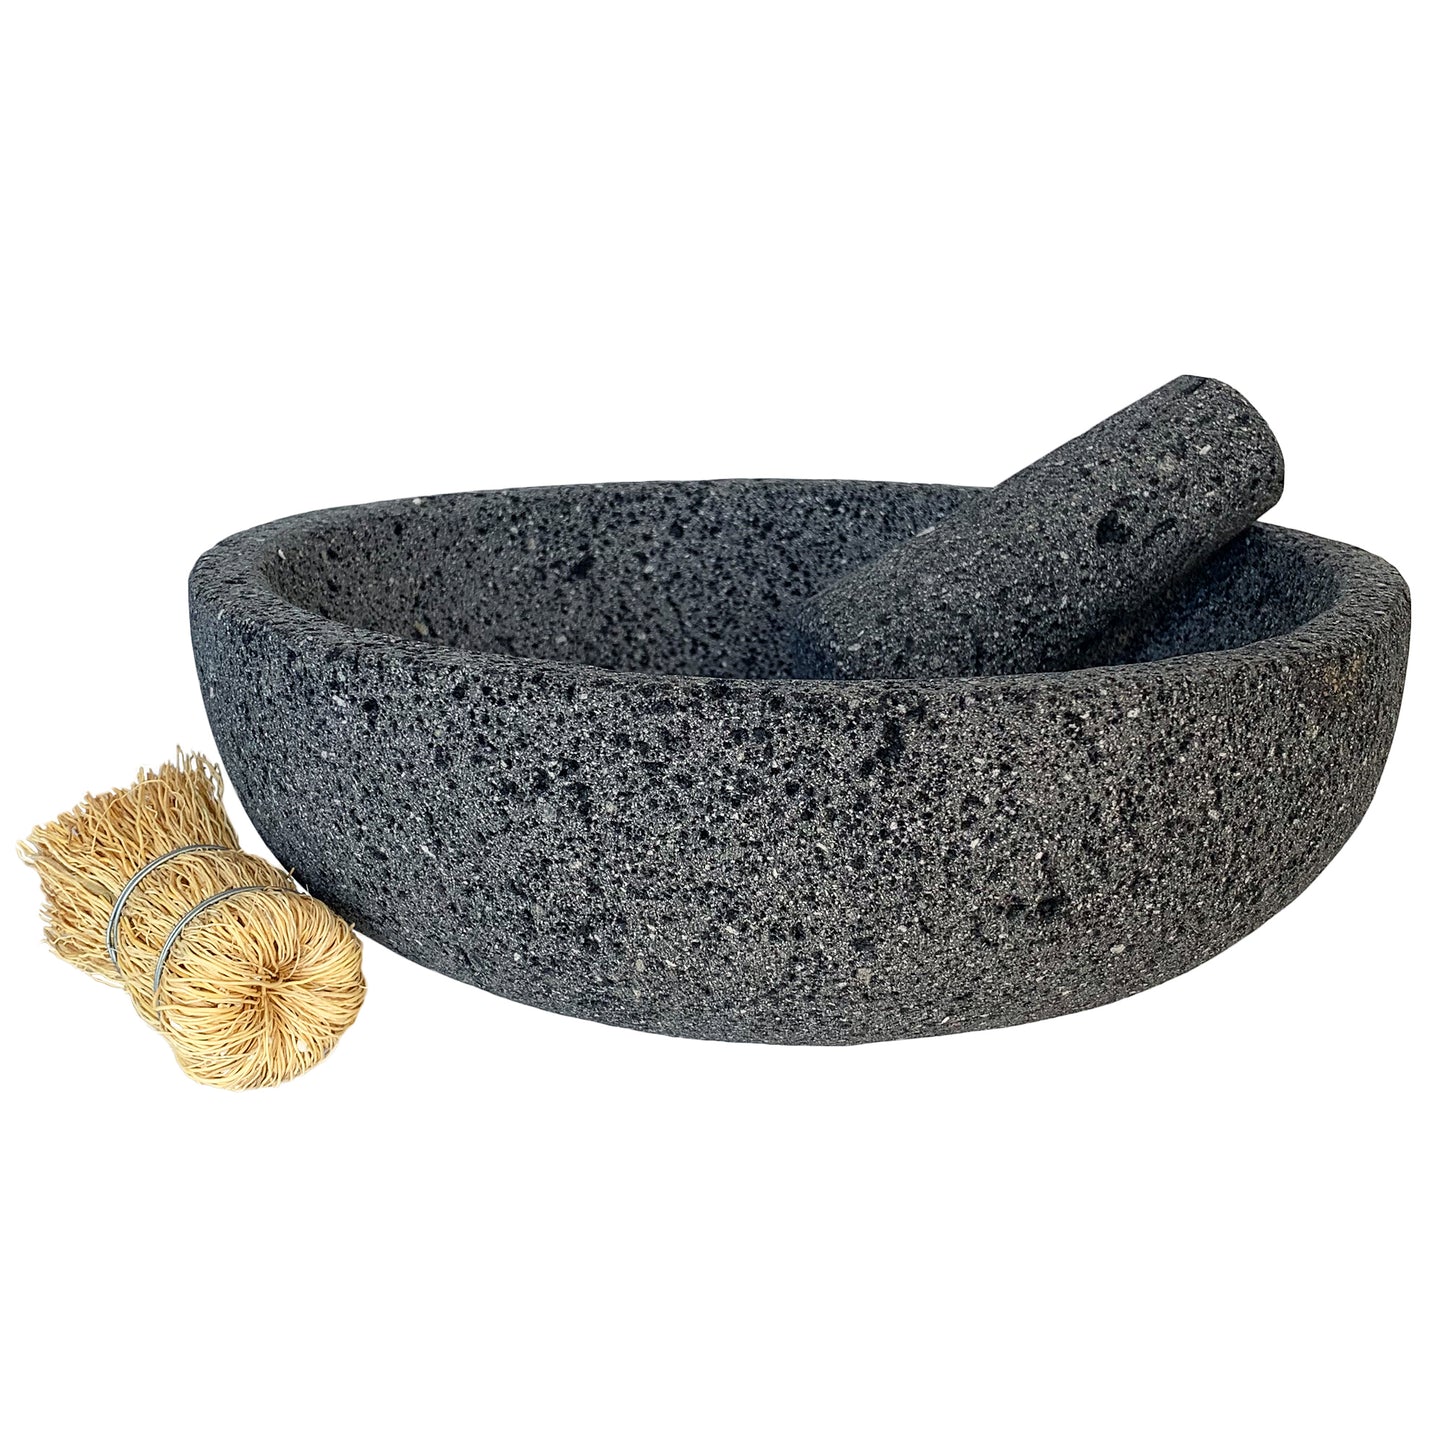 Large (12 inch) Mexican Molcajete Bowl | Hand-carved 100% Volcanic Stone | Molcajete Mexicano de Piedra Volcanica Grande | 8 Cup Capacity